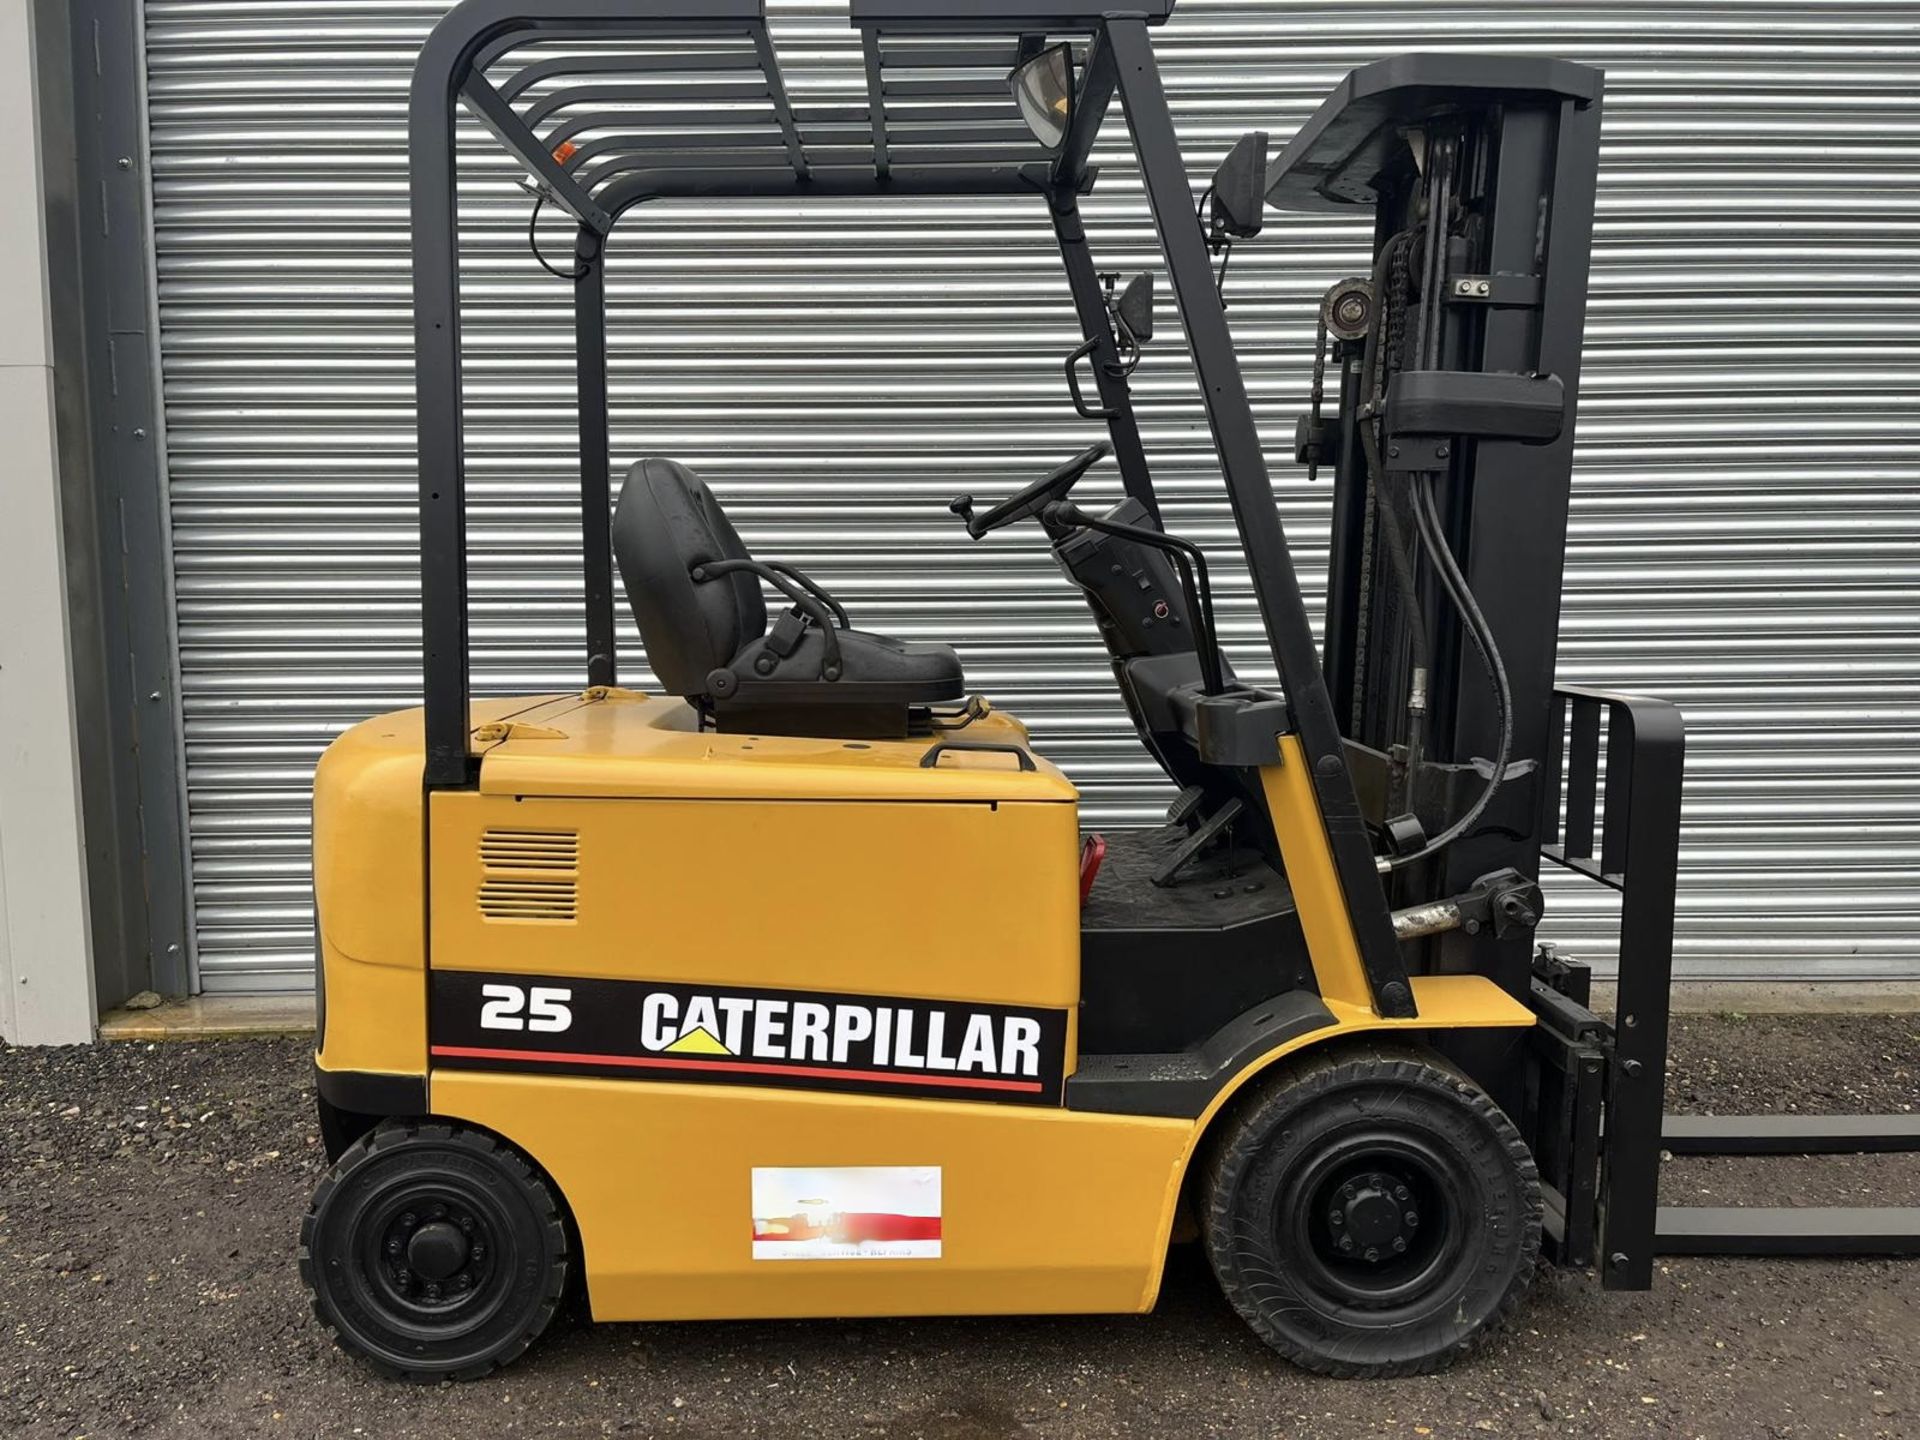 2014 - CATERPILLAR, EP25, 2.5 Tonne Electric Forklift - Image 6 of 7